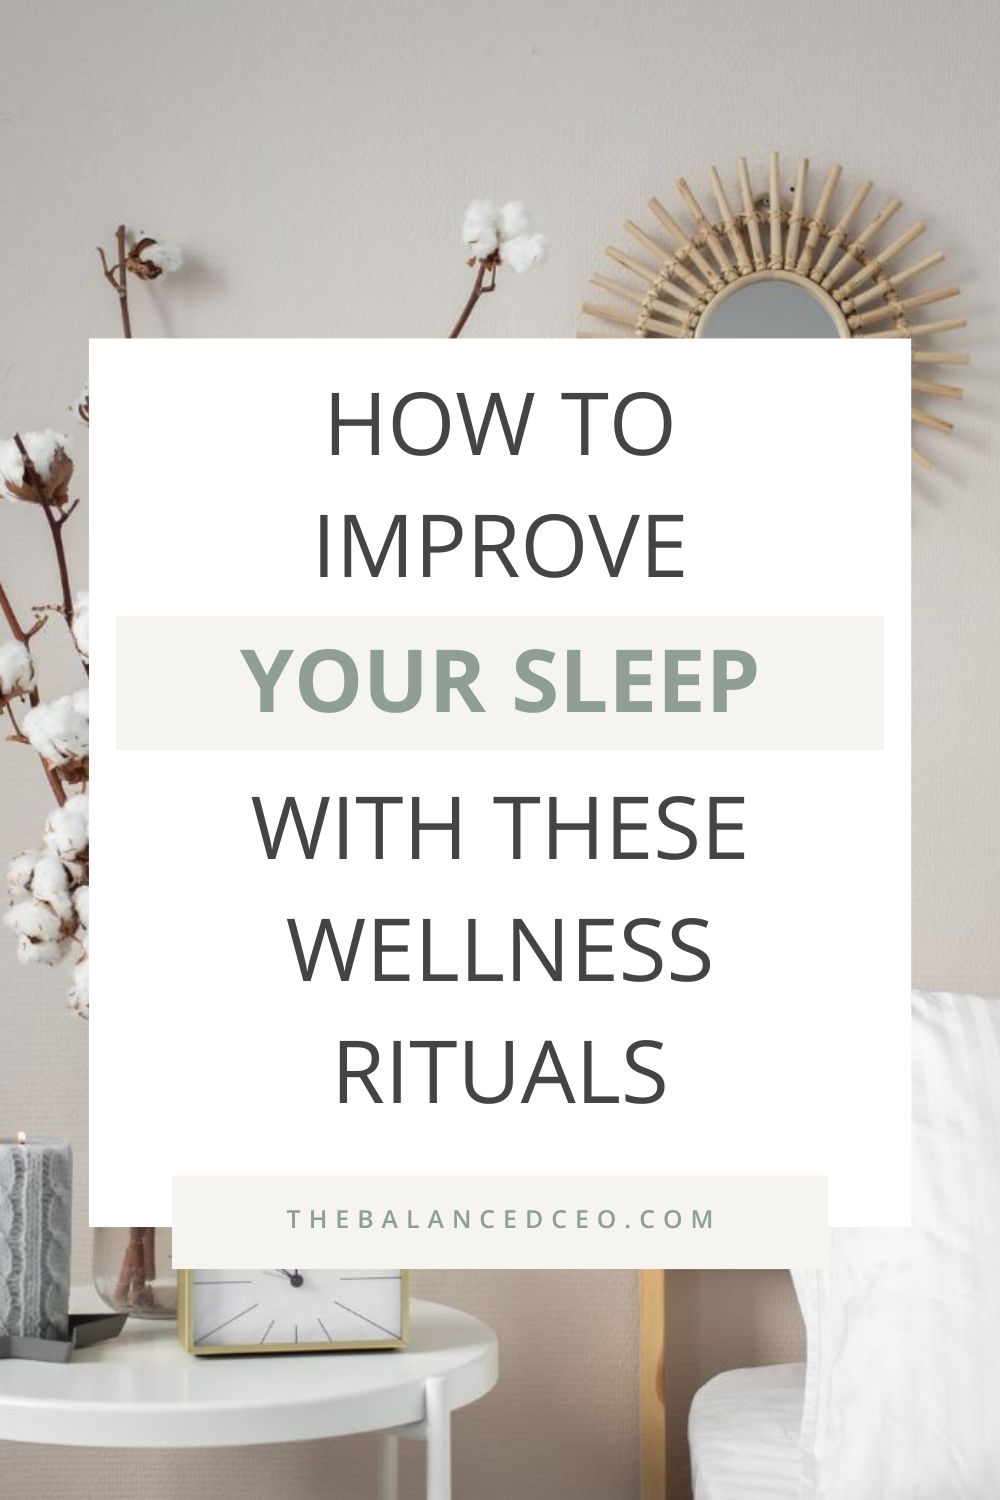 How To Improve Your Sleep With These Wellness Rituals